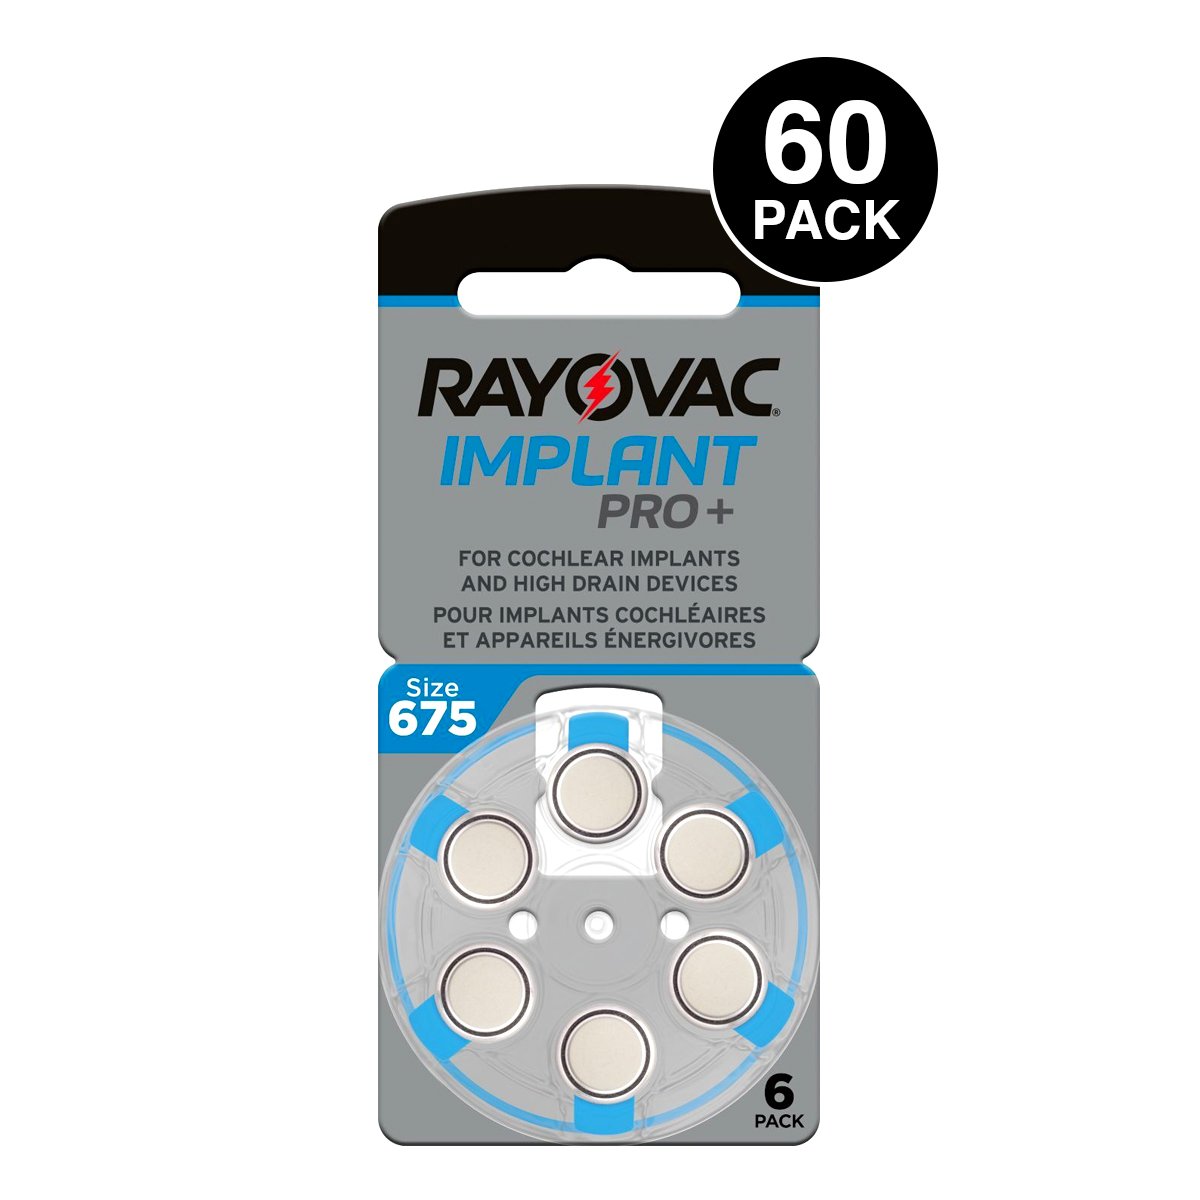 Rayovac Implant Pro, 675P Cochlear Implant Batteries (60 Pcs)